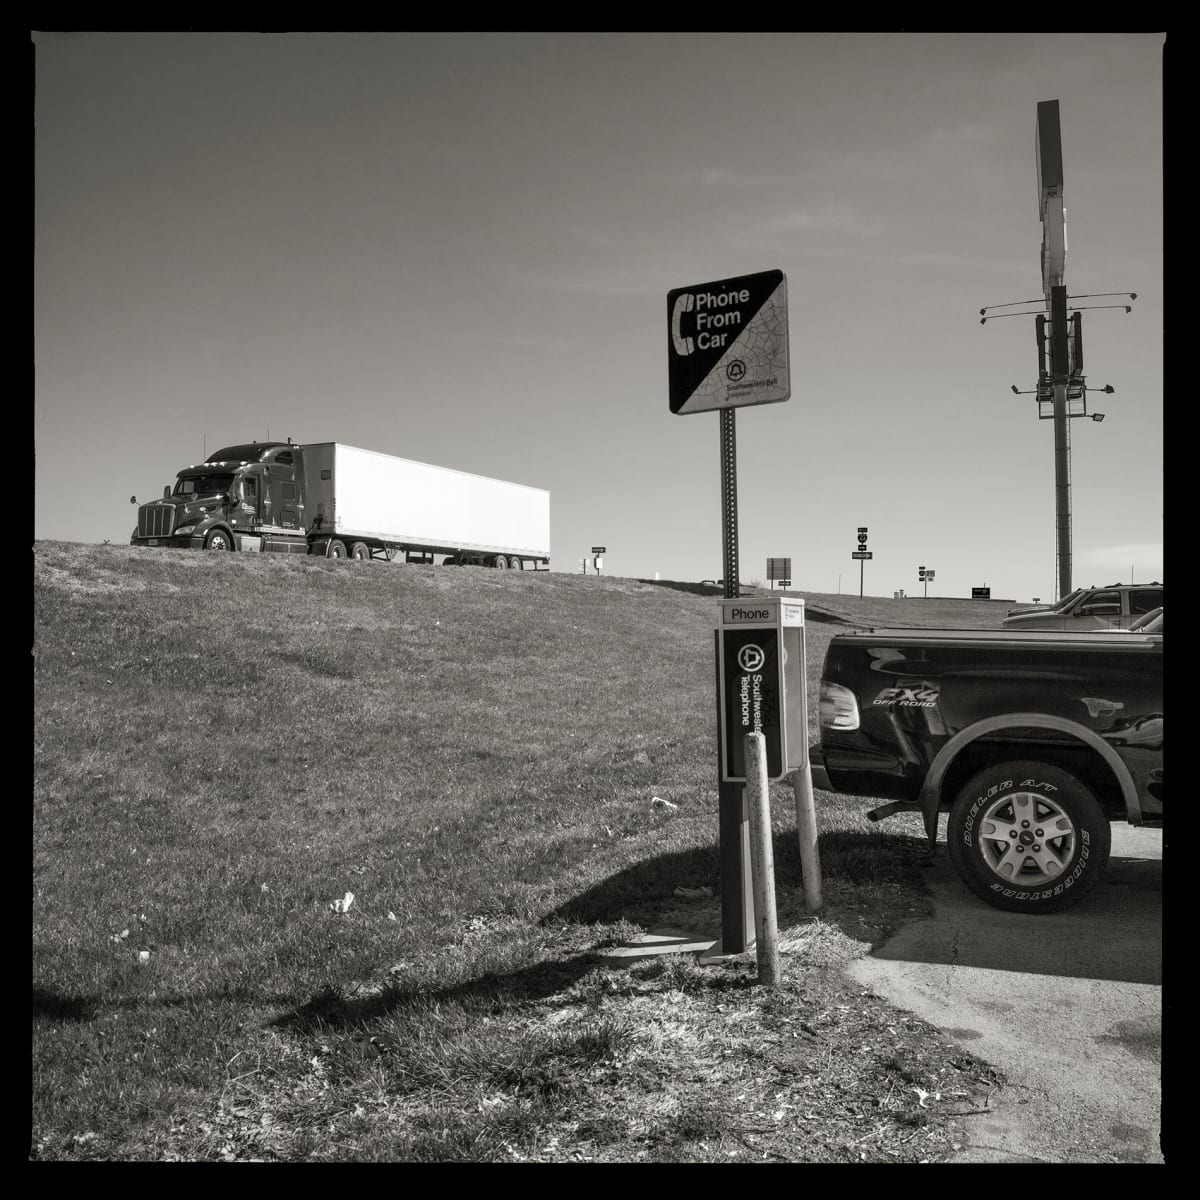 Unknown Number- Outside Springfield, NY by Eric T. Kunsman  Image: ID: A black and white image shows a payphone at the corner of a parking lot with a sign that reads "phone from car".  There is a semi truck in the background on the road.